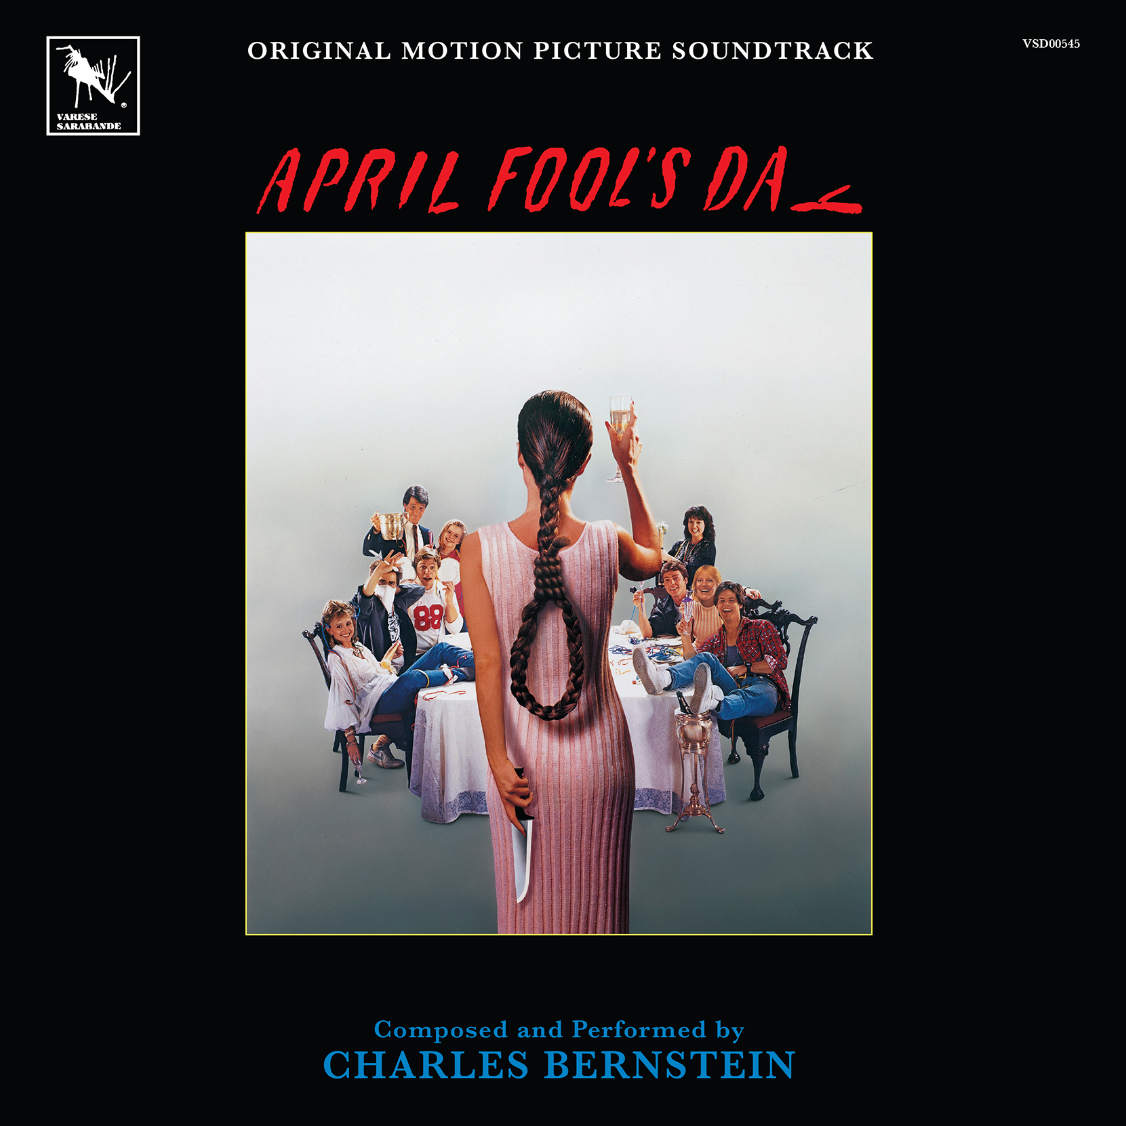 CHARLES BERNSTEIN’S SCORE FOR CULT-CLASSIC ’80s SLASHER APRIL FOOL’S DAY GETS 2-LP DELUXE EXPANSION